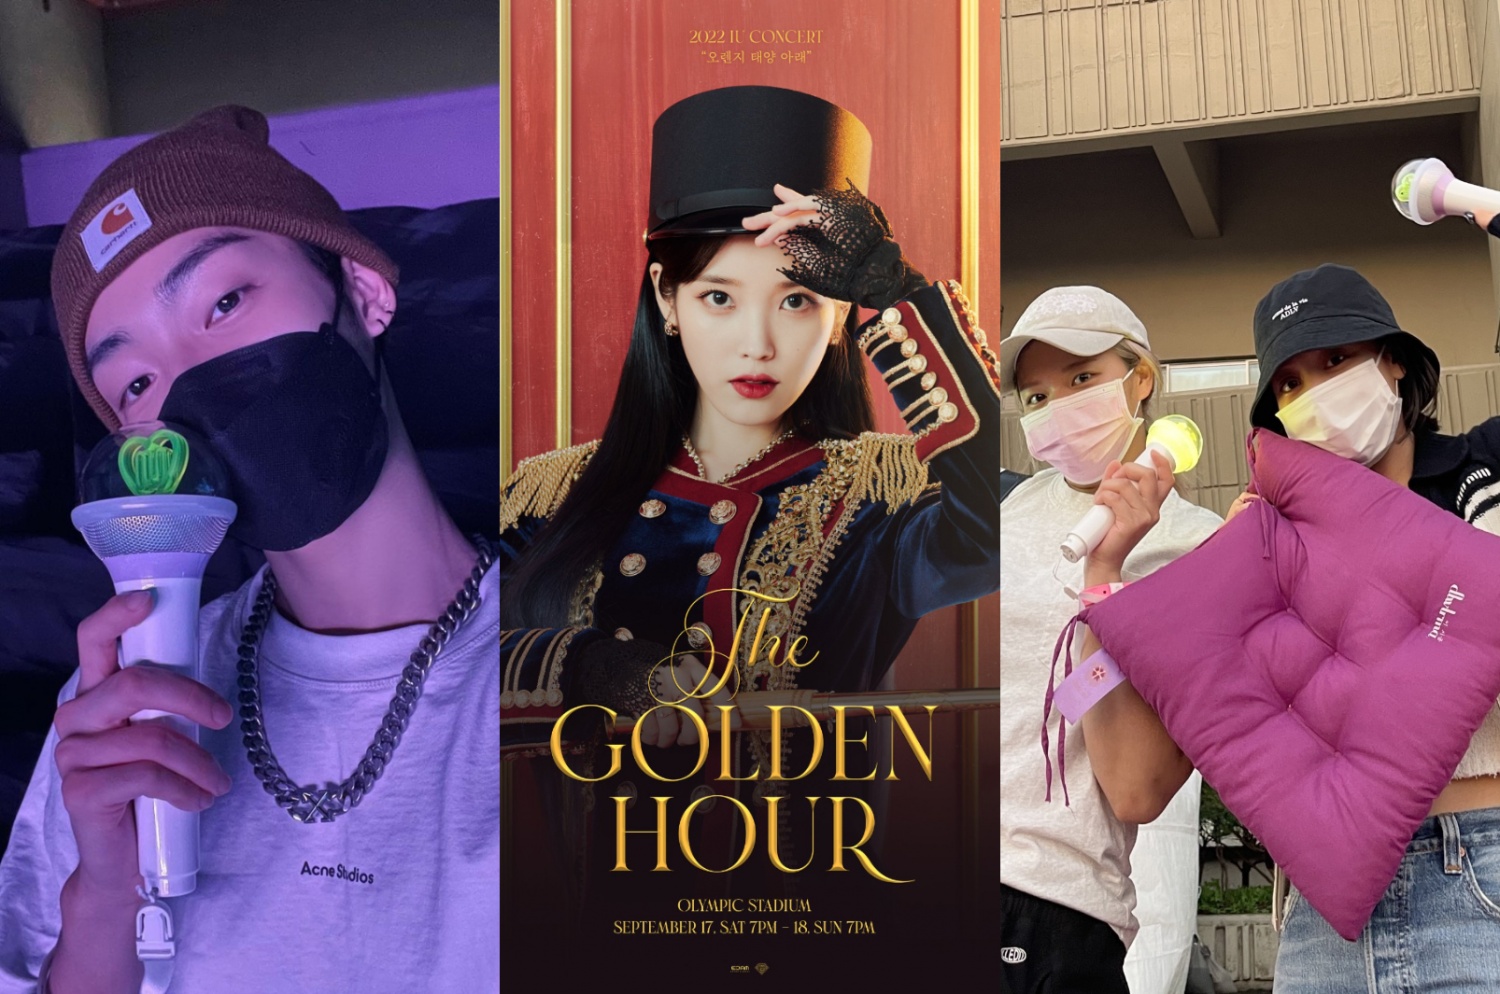 The second day of the IU “Golden Hour” concert with a few K-pop idols – who were they?